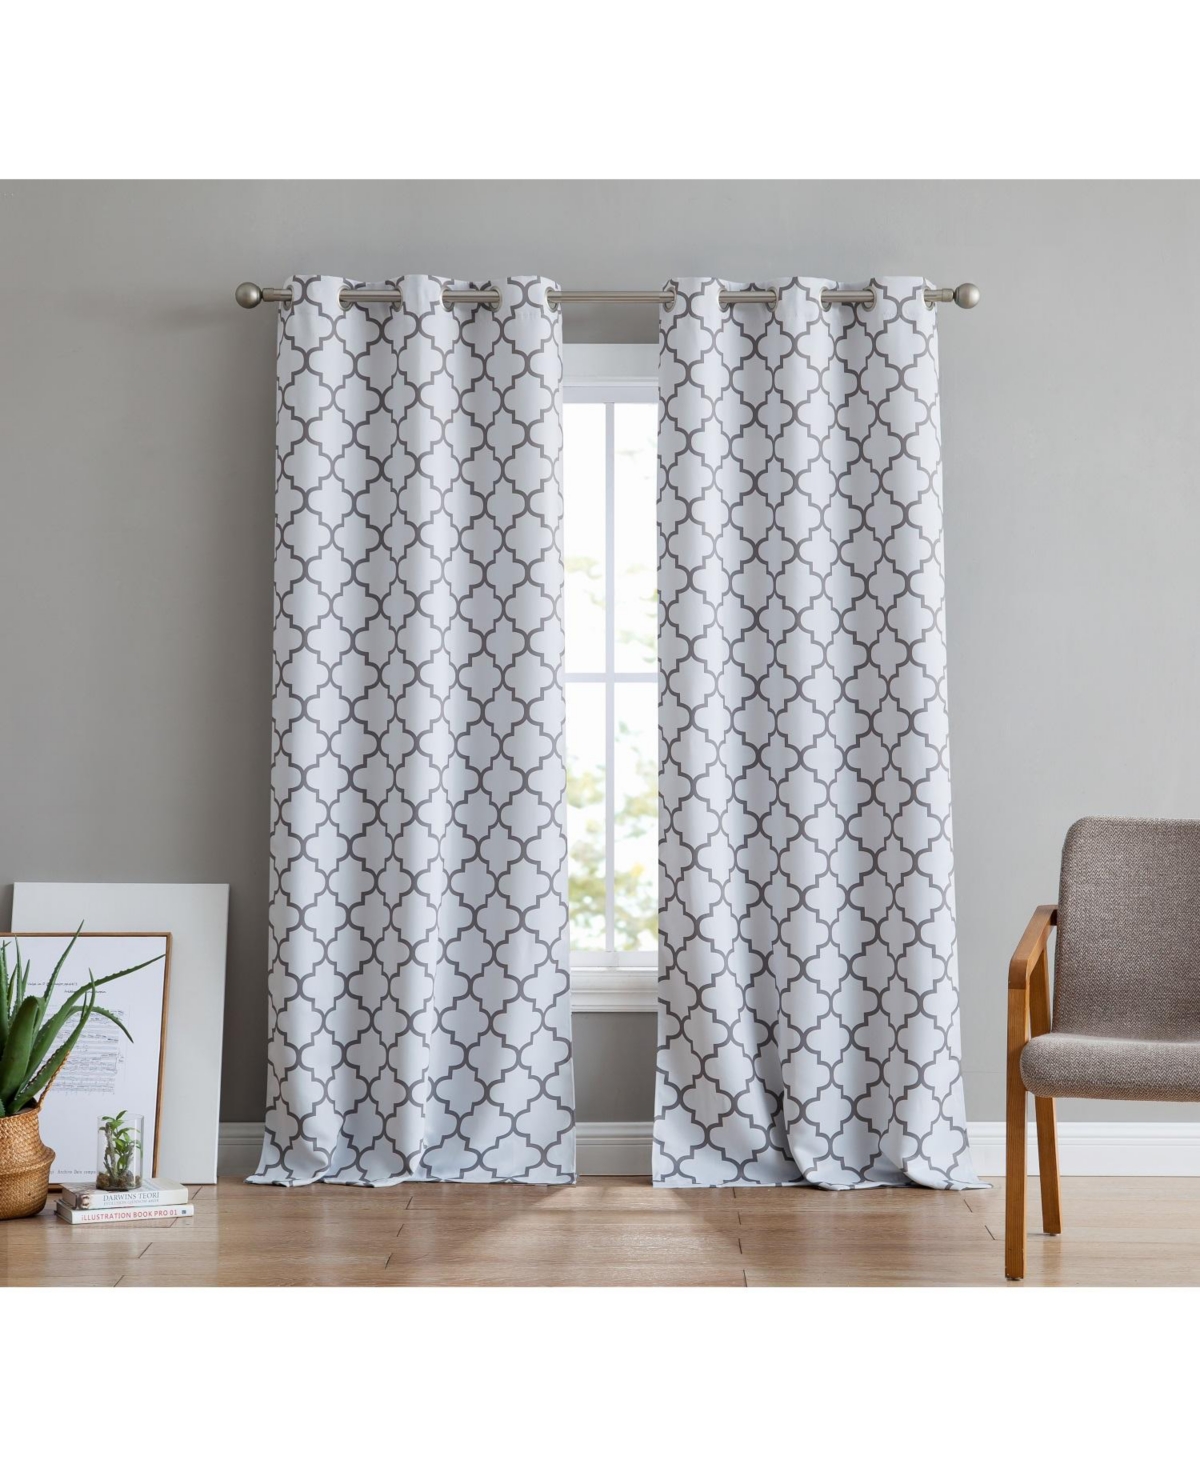 Lattice Print Drape Blackout Curtains Pattern - Weather Insulated Curtains, Sun Blocking Window Treatment Draperies for Living Room - Set of 2